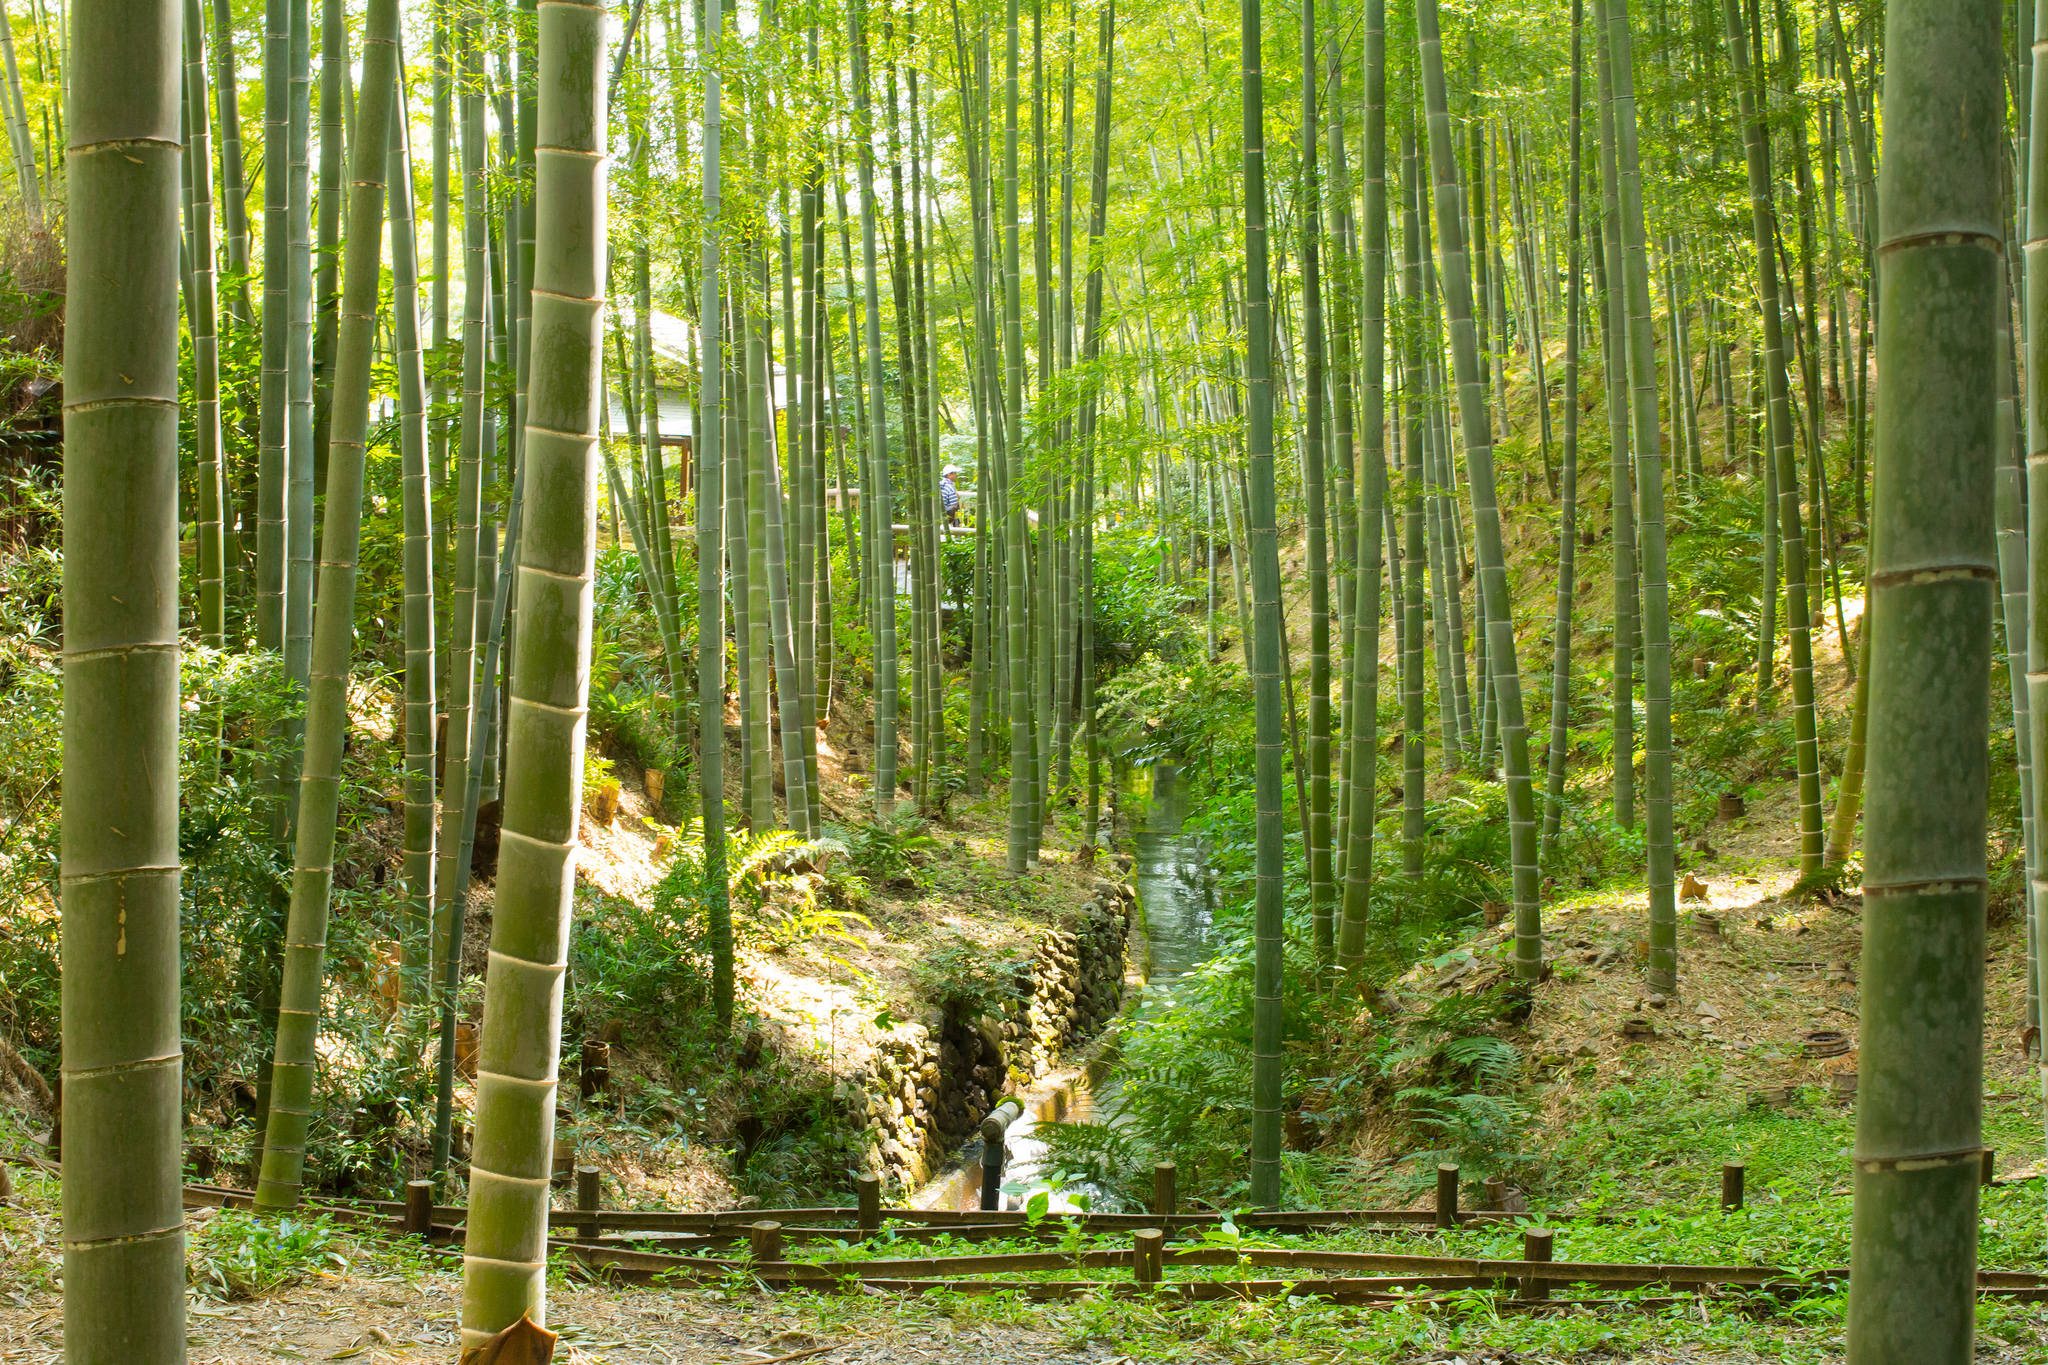 Bamboo forest photo